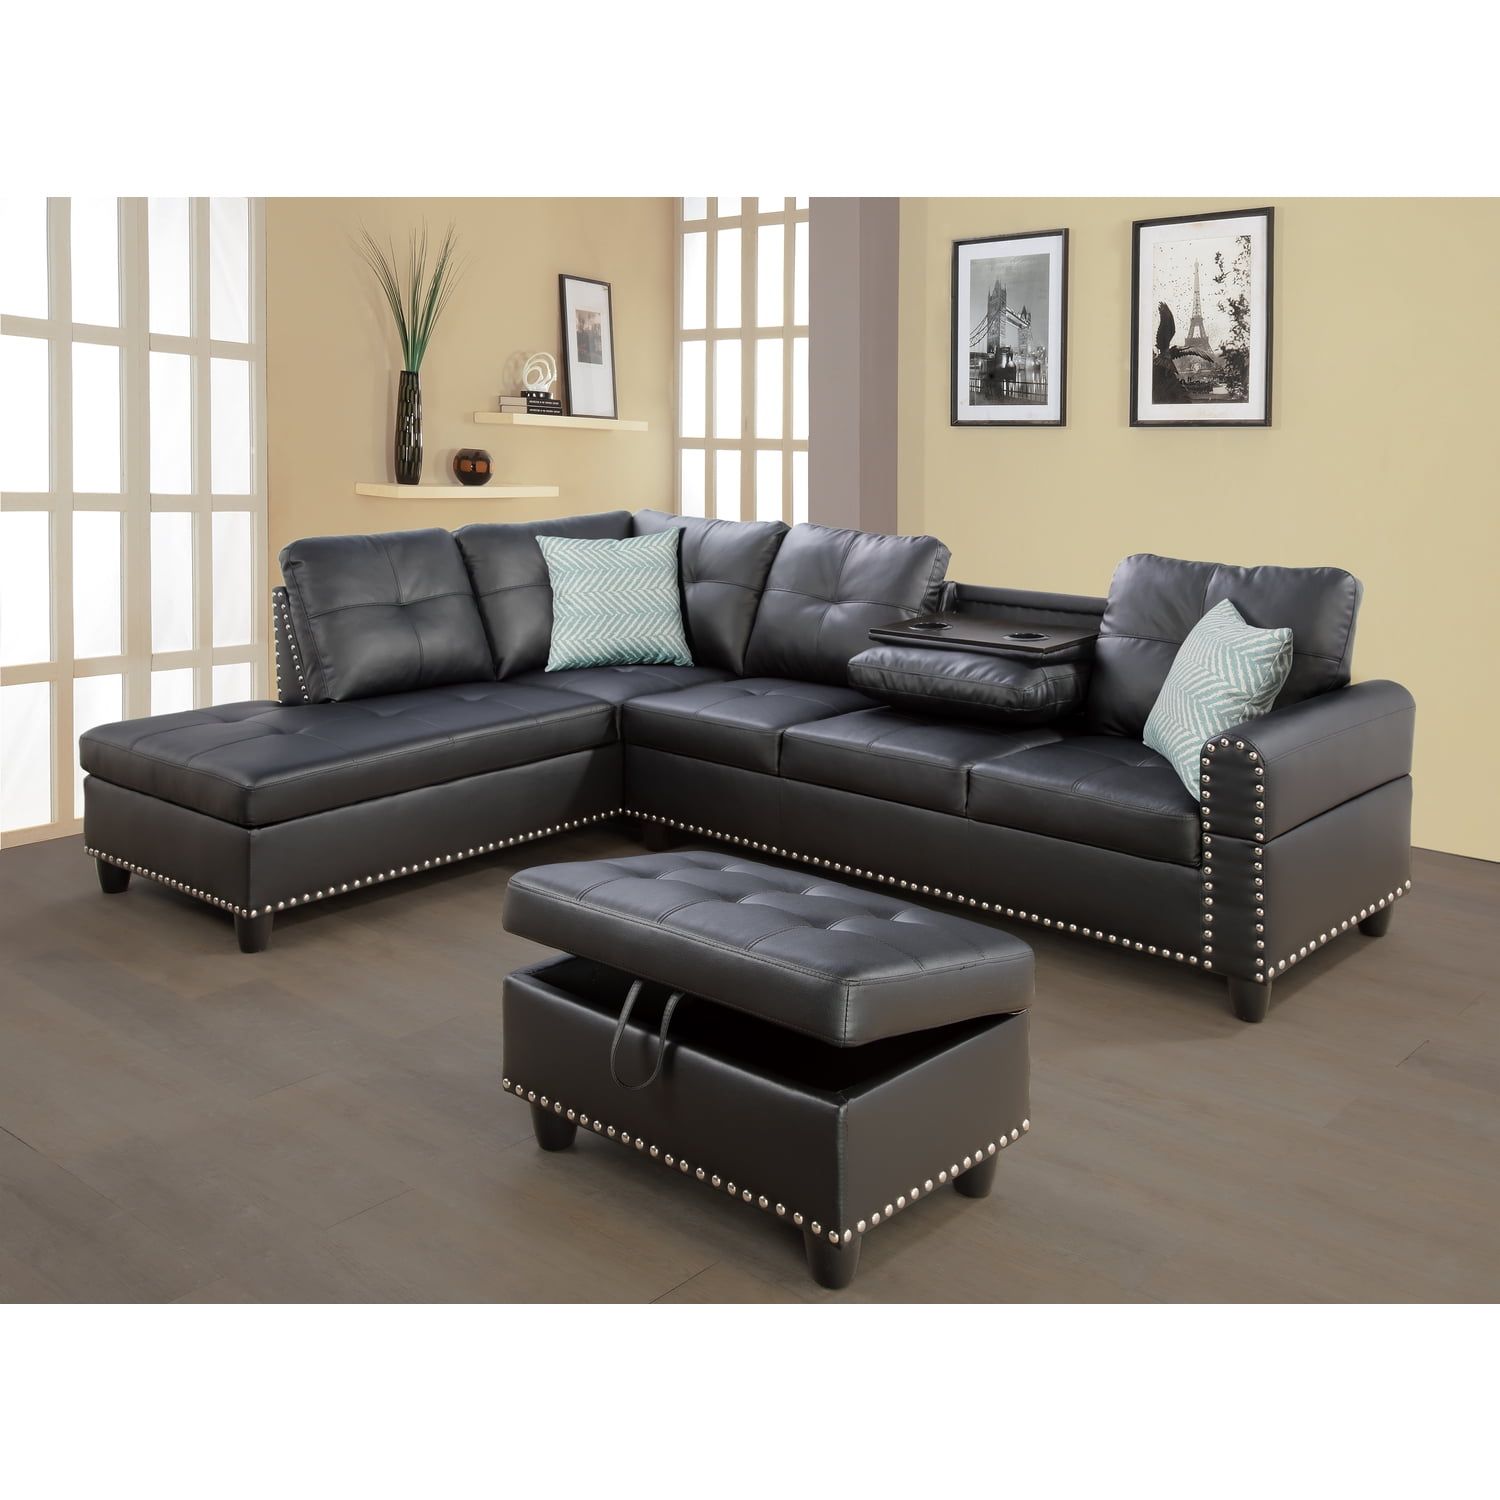 Devion Furniture Faux Leather Sectional Sofa With Ottoman Black –  Walmart For Faux Leather Sectional Sofa Sets (View 6 of 15)